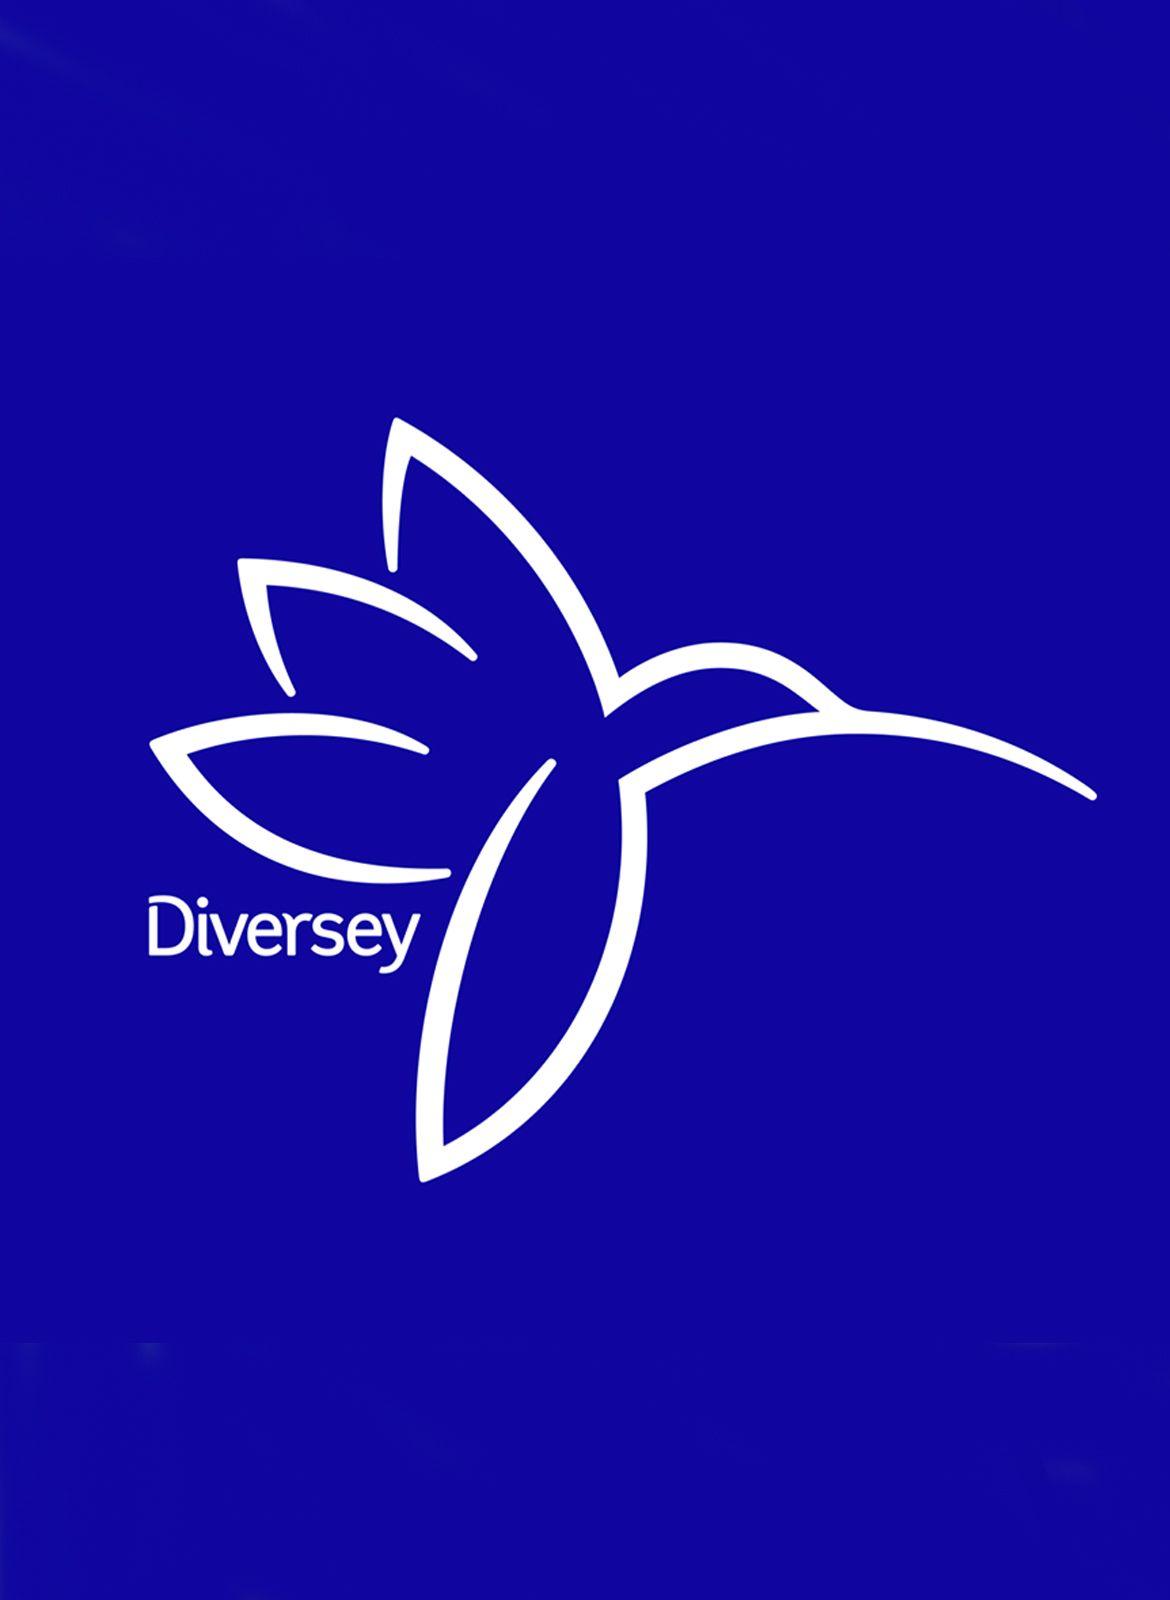 Diversey Logo - Launch of new corporate identity. Mulberry Marketing Communications